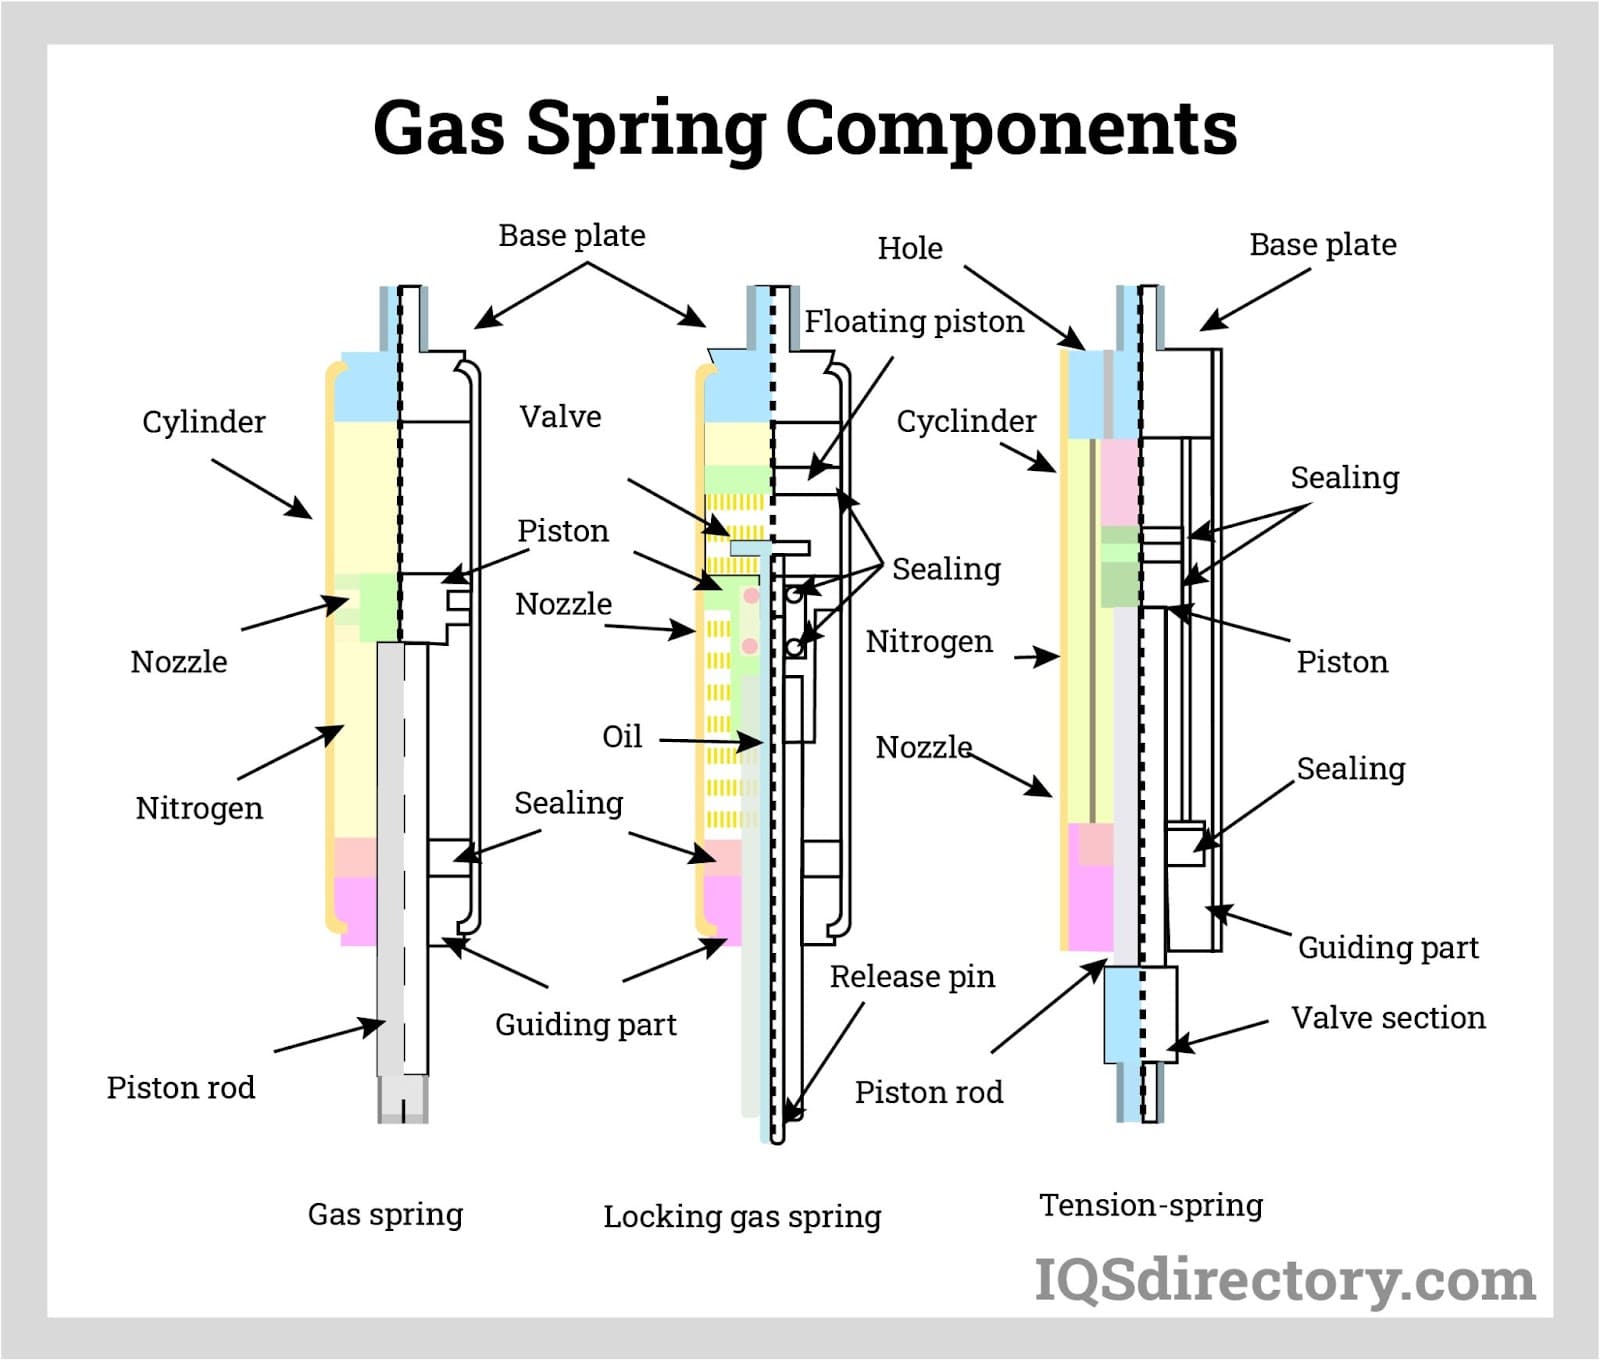 Automotive Gas Springs - Gas Spring For Automobile Applications 